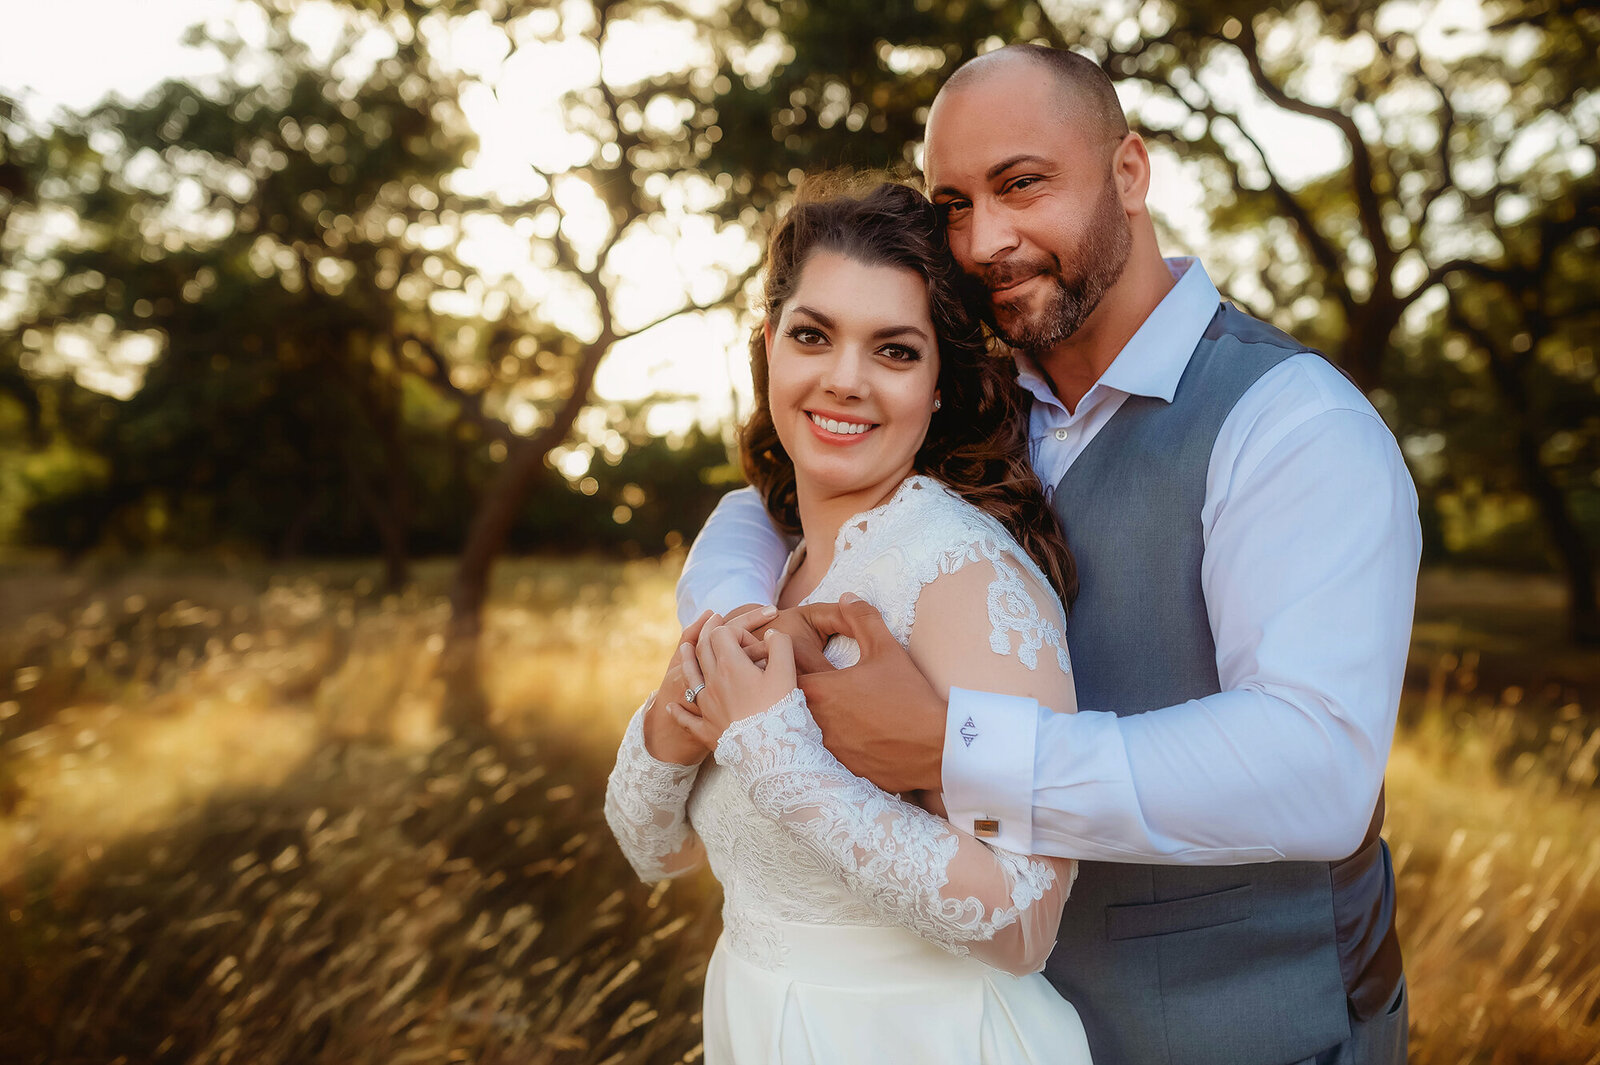 Newlyweds pose for portraits after their Micro Wedding in San Antonio, Texas.